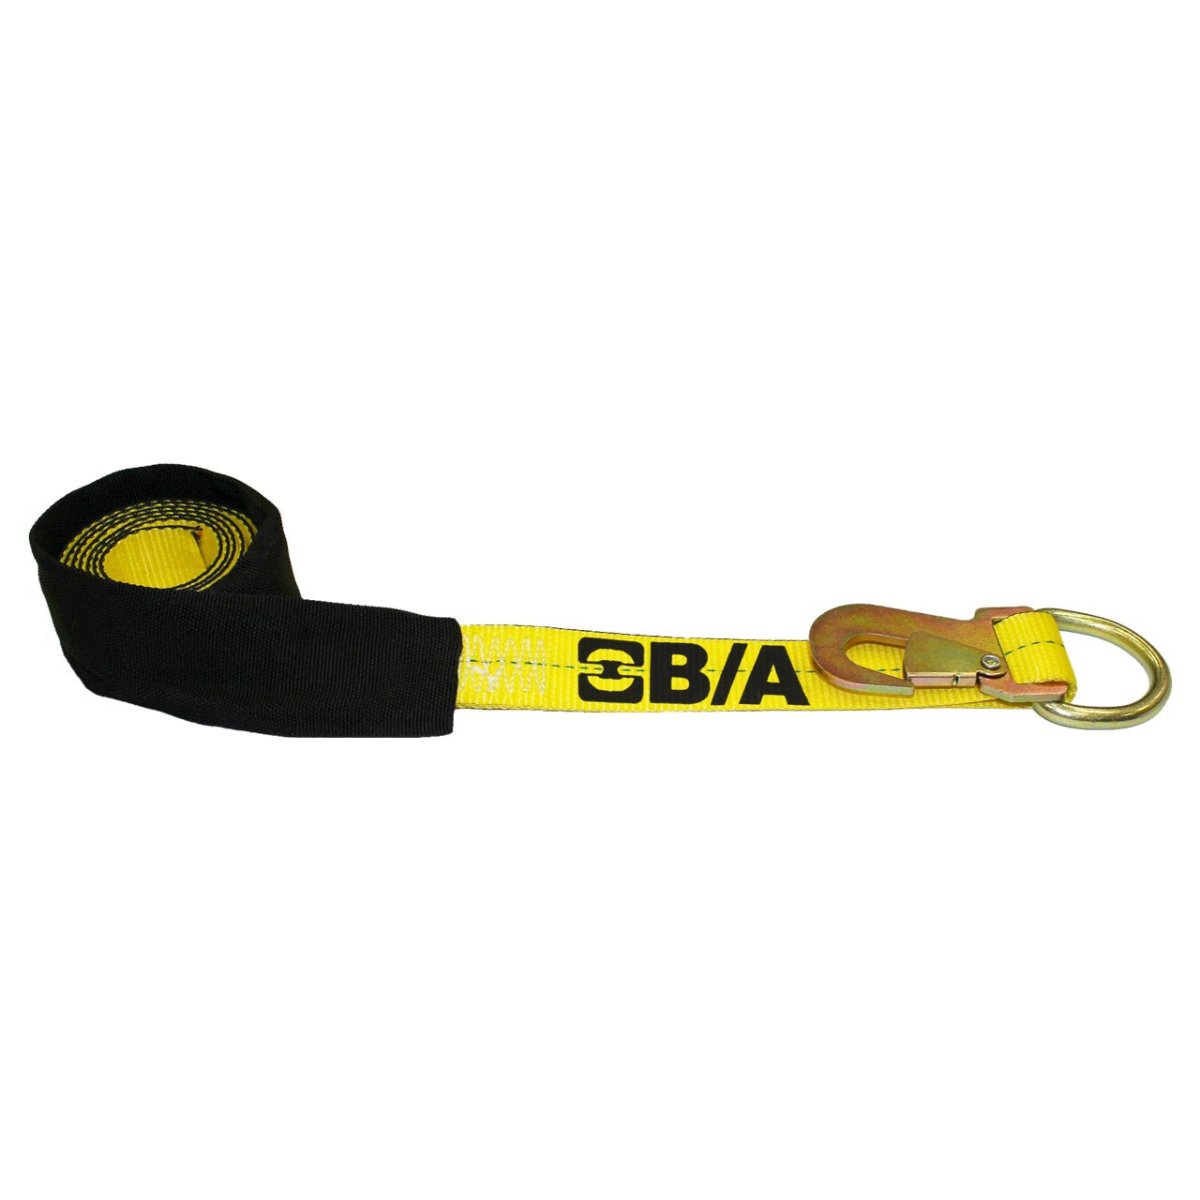 B/A Products Co. 1.75" x 8' Flat Snap Hook & Large D-Ring Wheel Lift Strap w/Cordura Sleeve - 38-3 - starequipmentsales